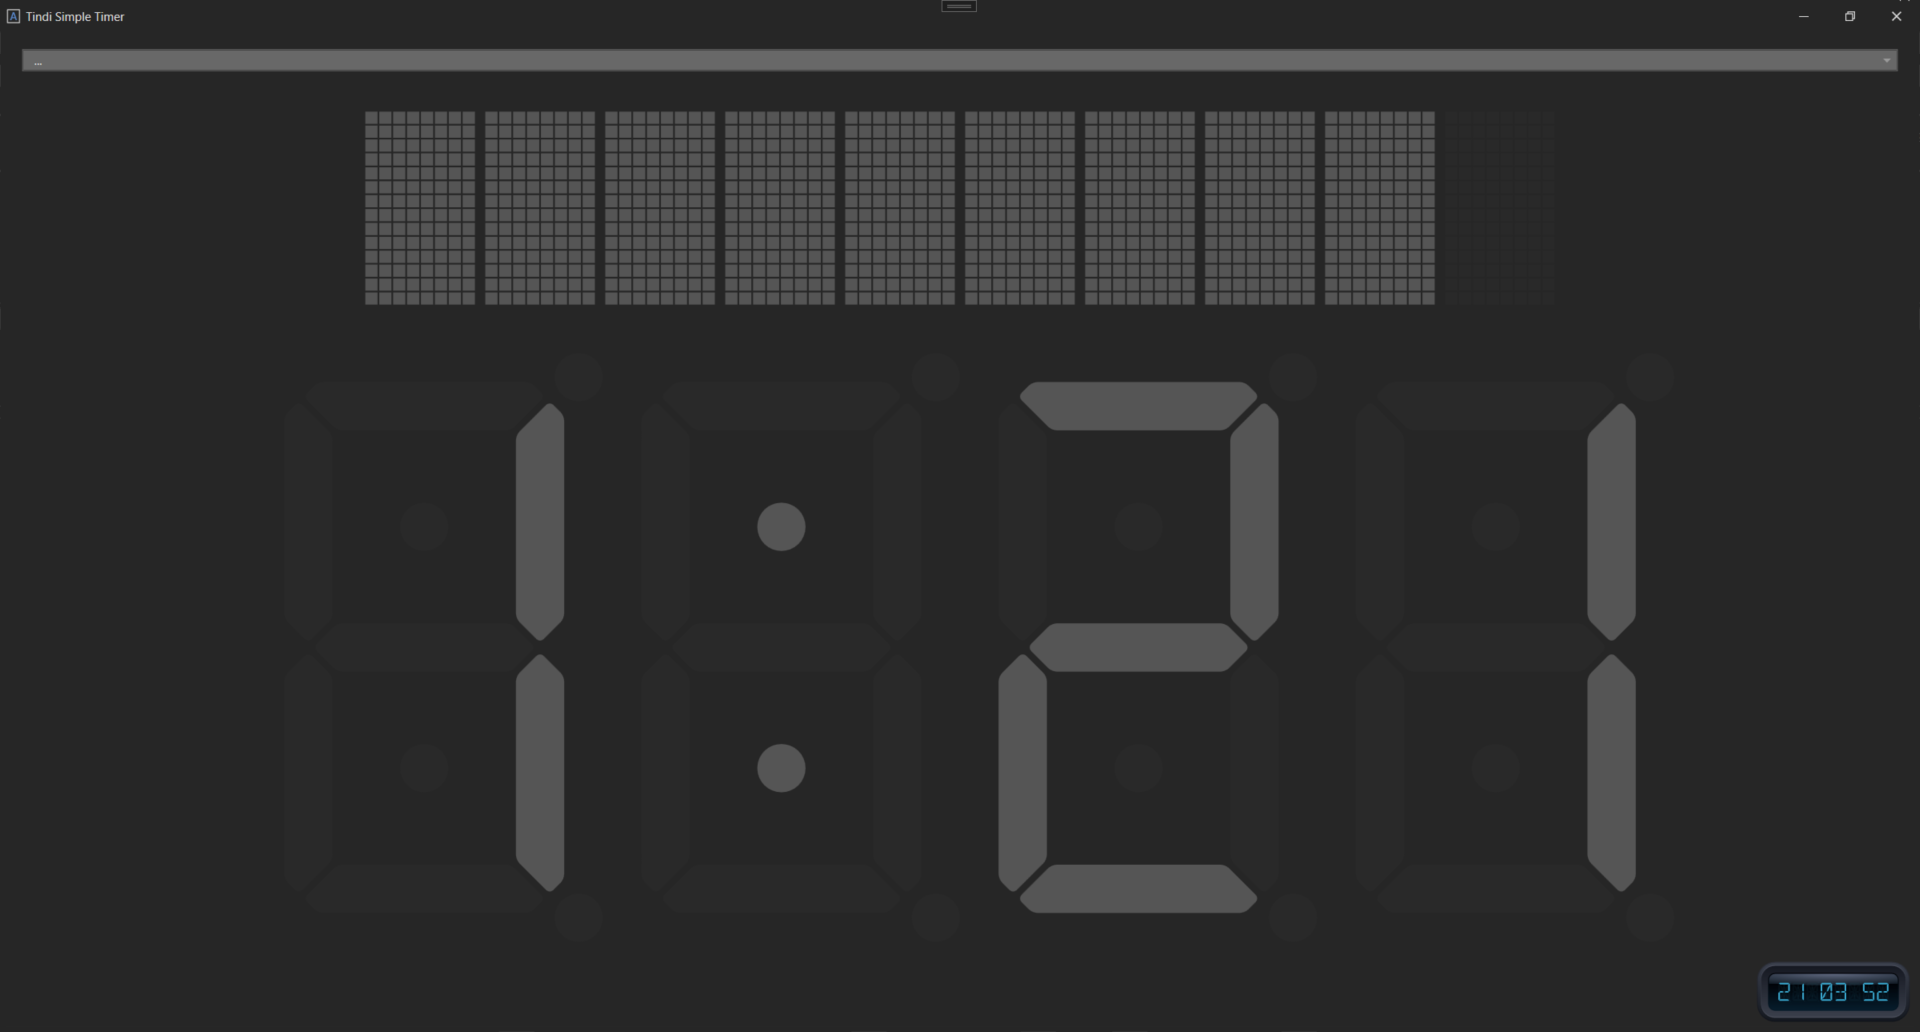 Timer with settings area closed with progress bar and clock visible